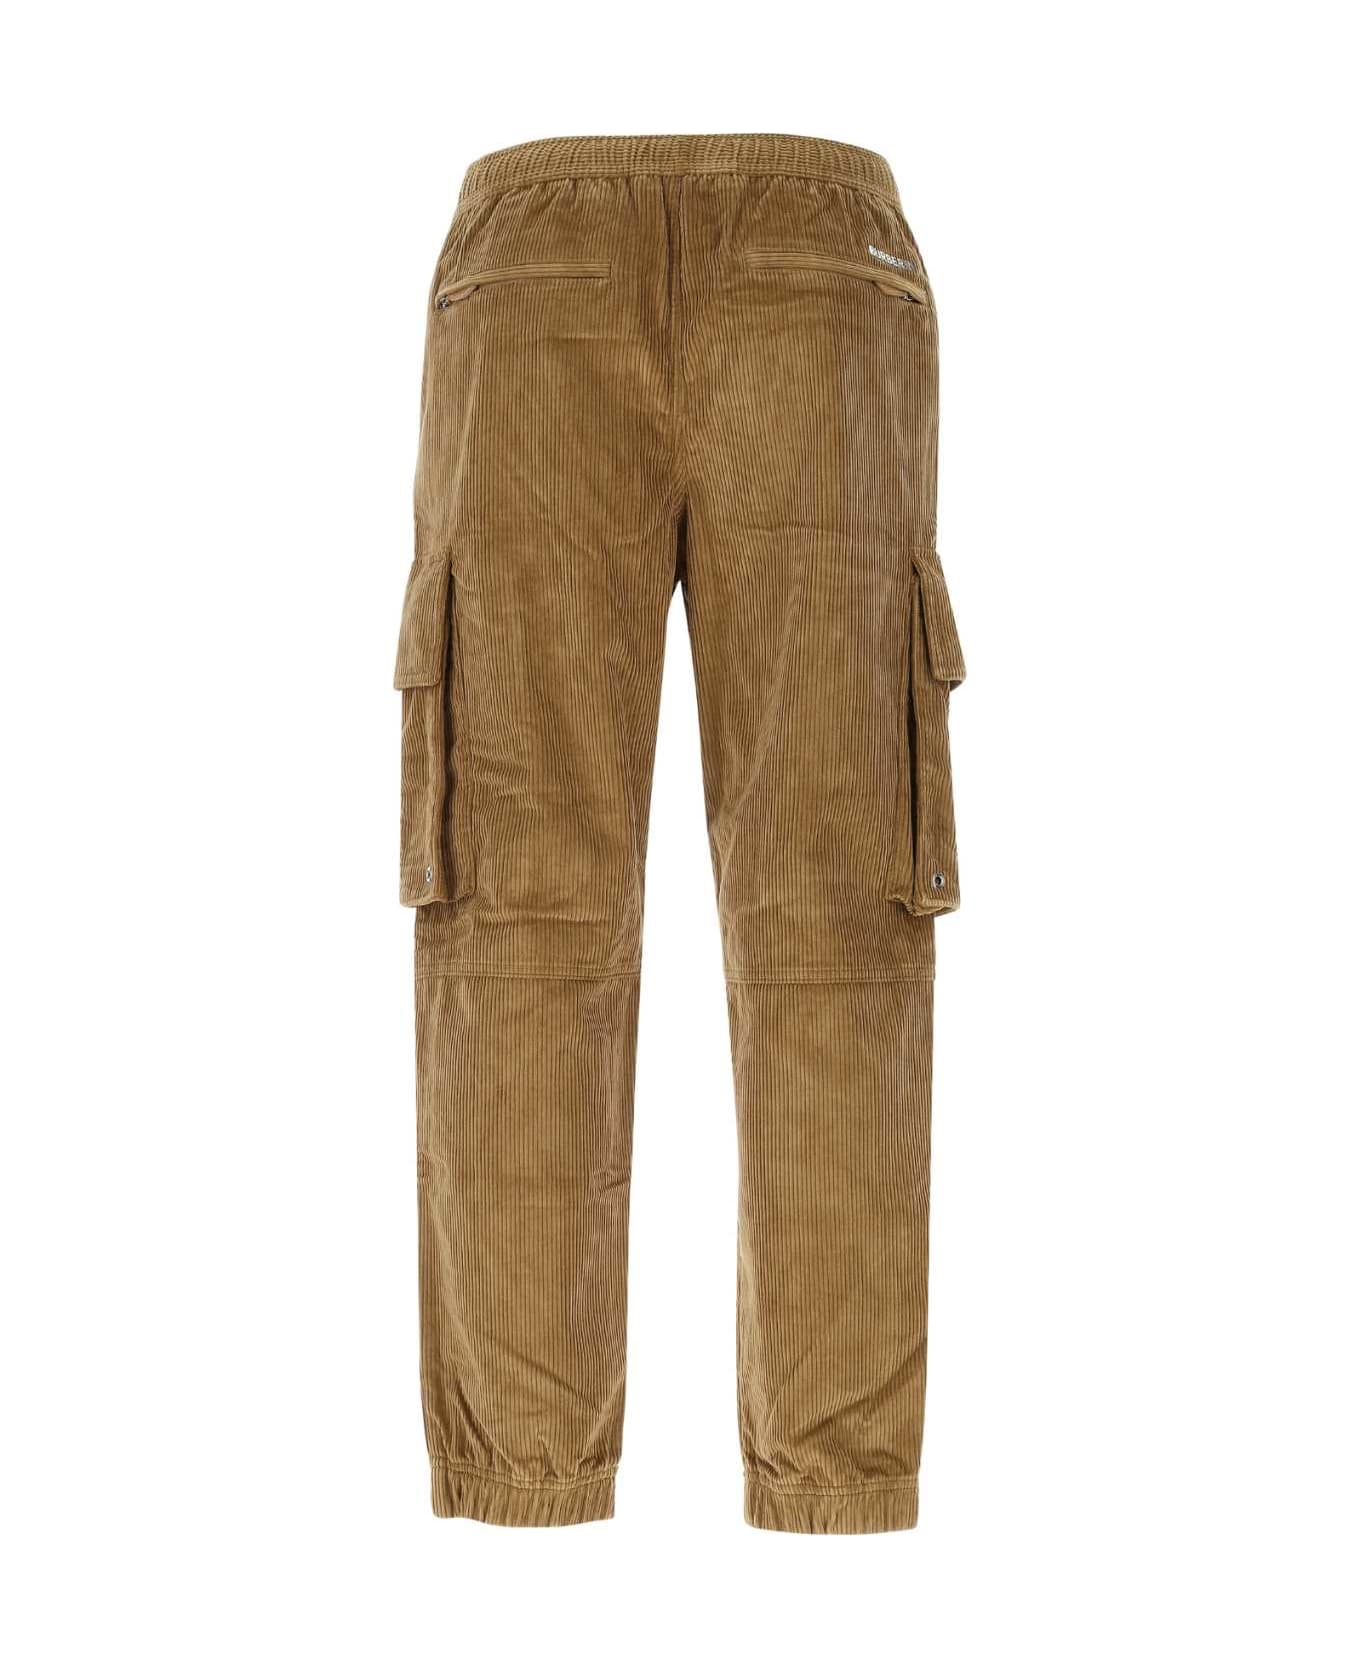 Burberry Biscuit Corduroy Cargo Pant - A1490 ボトムス